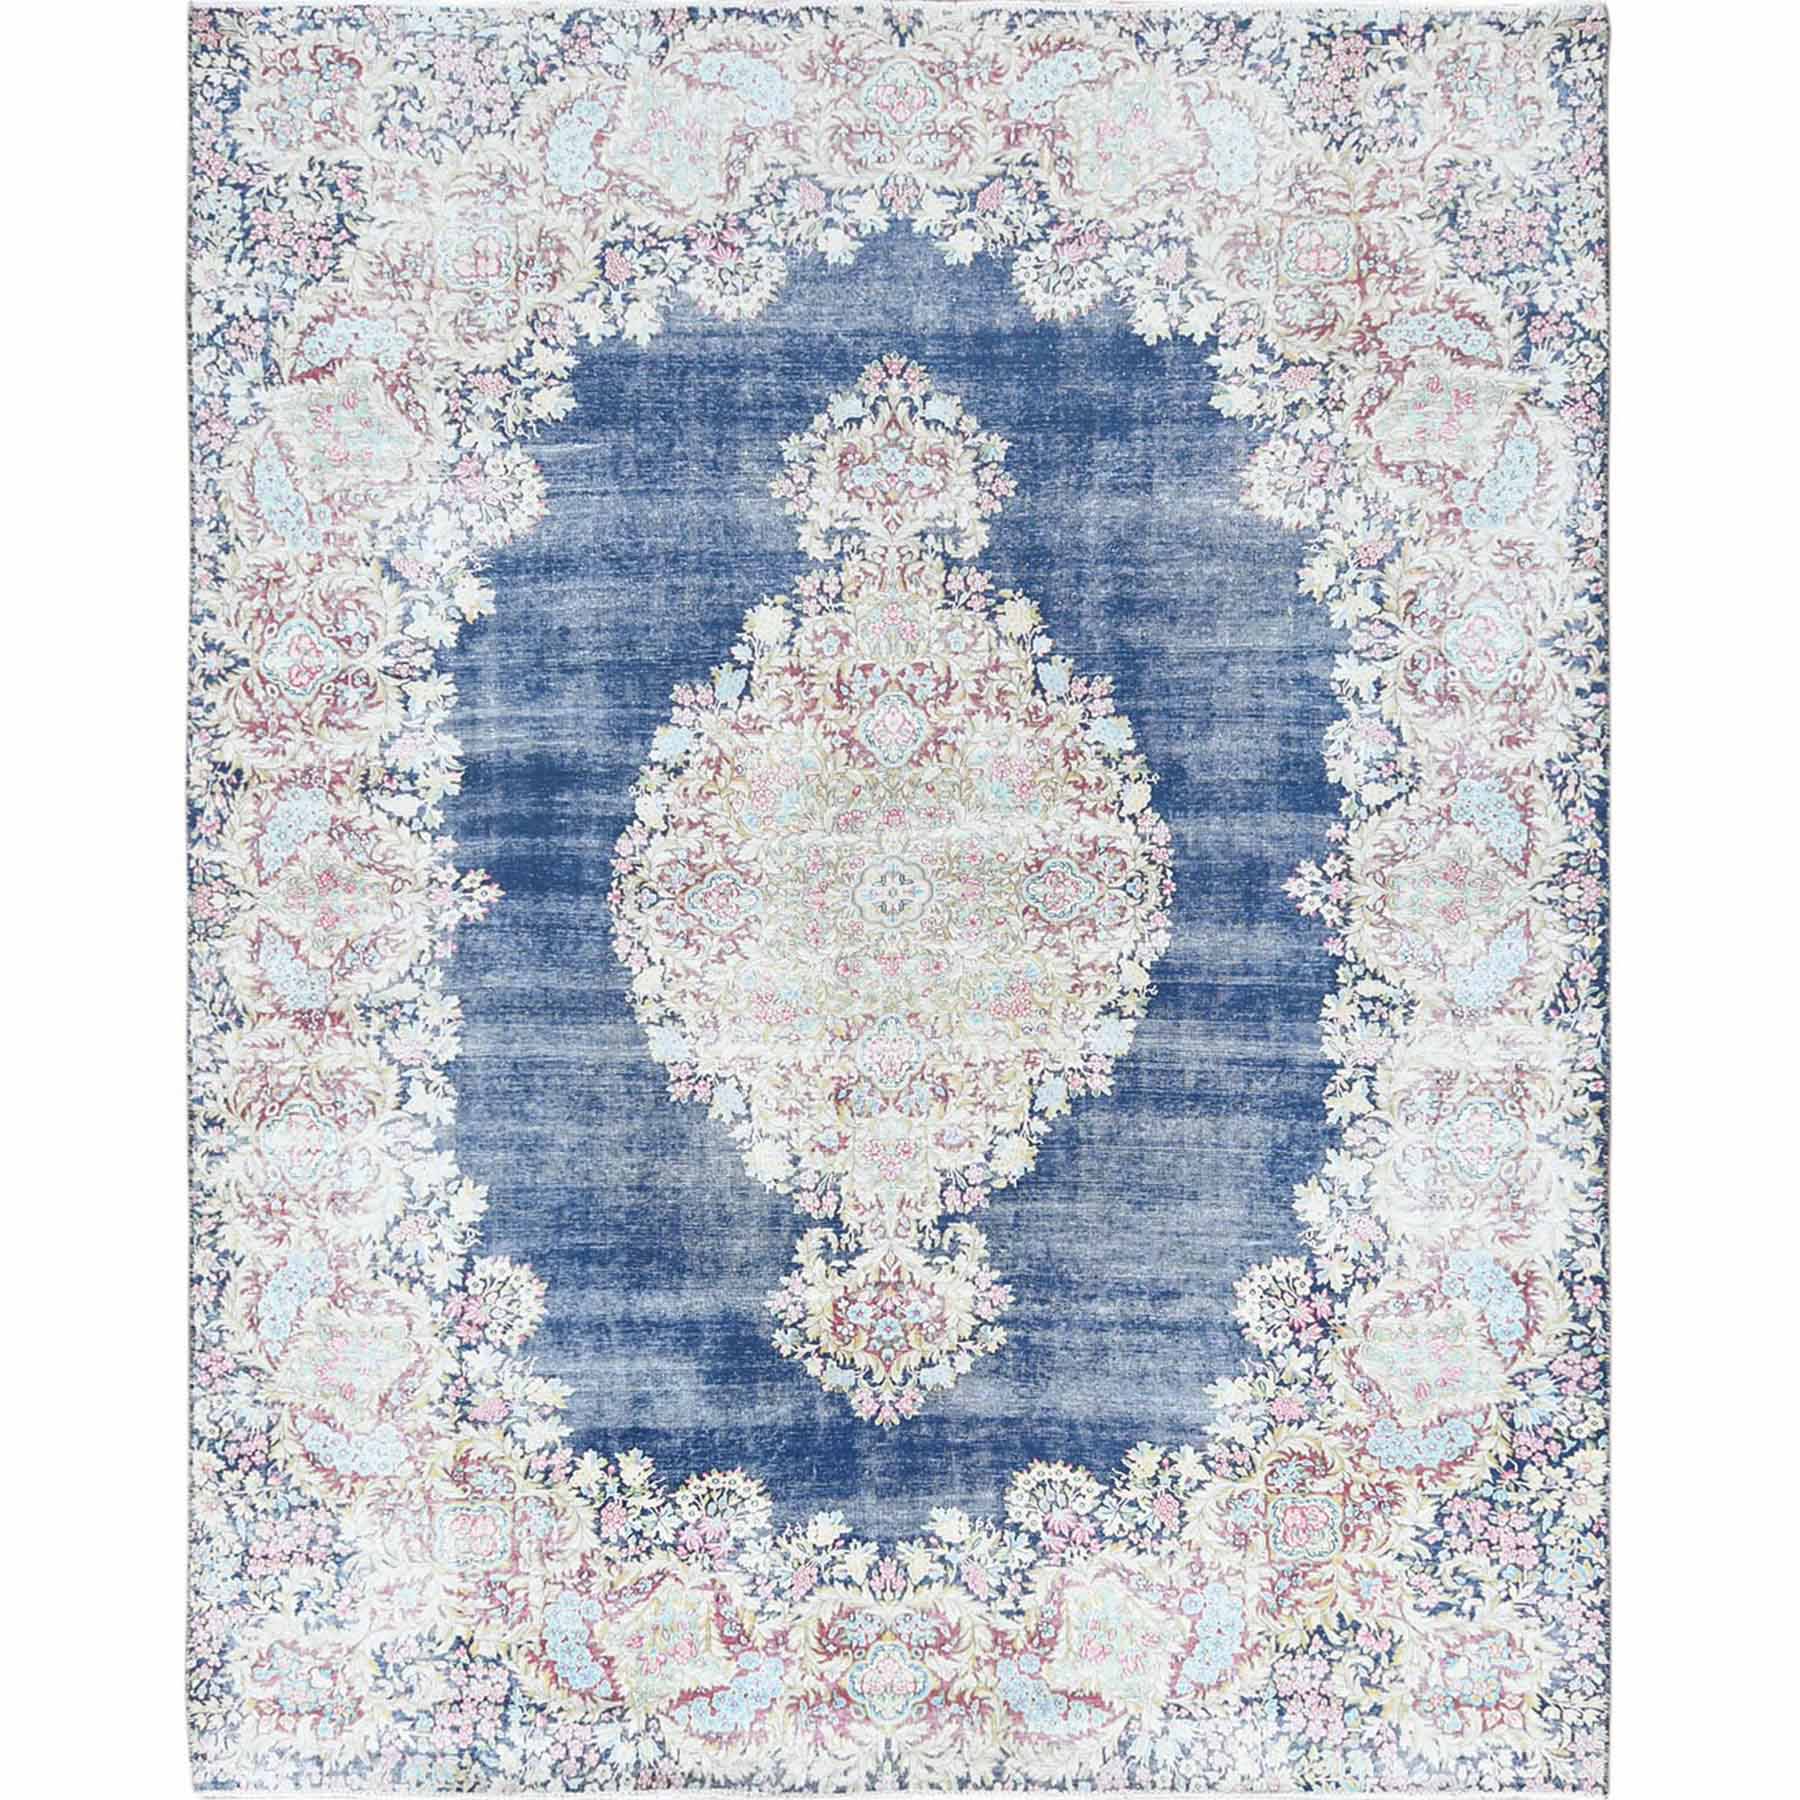 Overdyed-Vintage-Hand-Knotted-Rug-309005